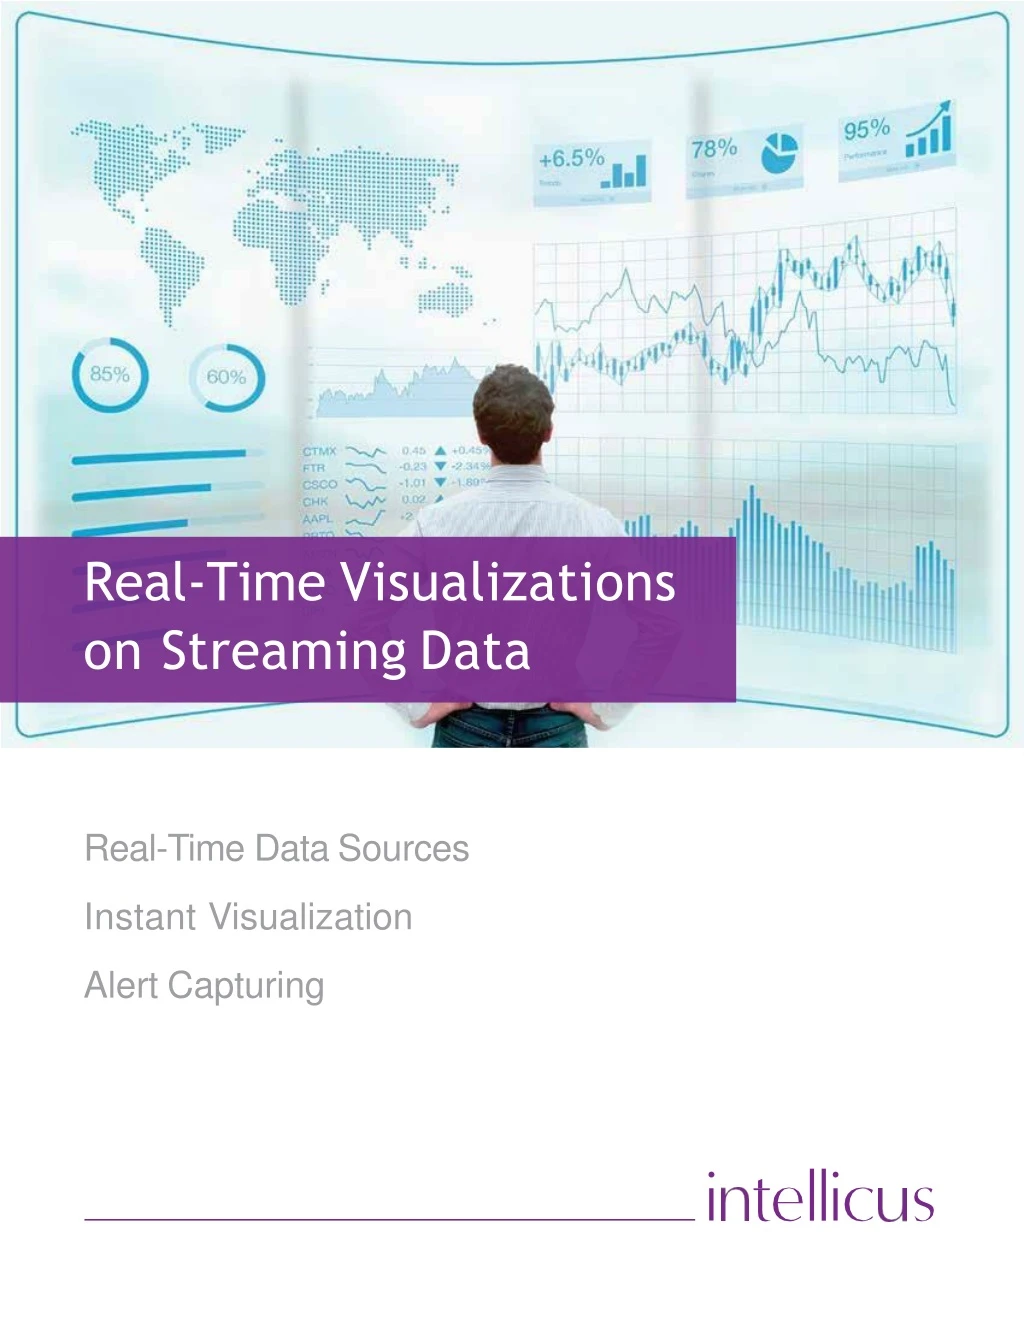 real time visualizations on streaming data